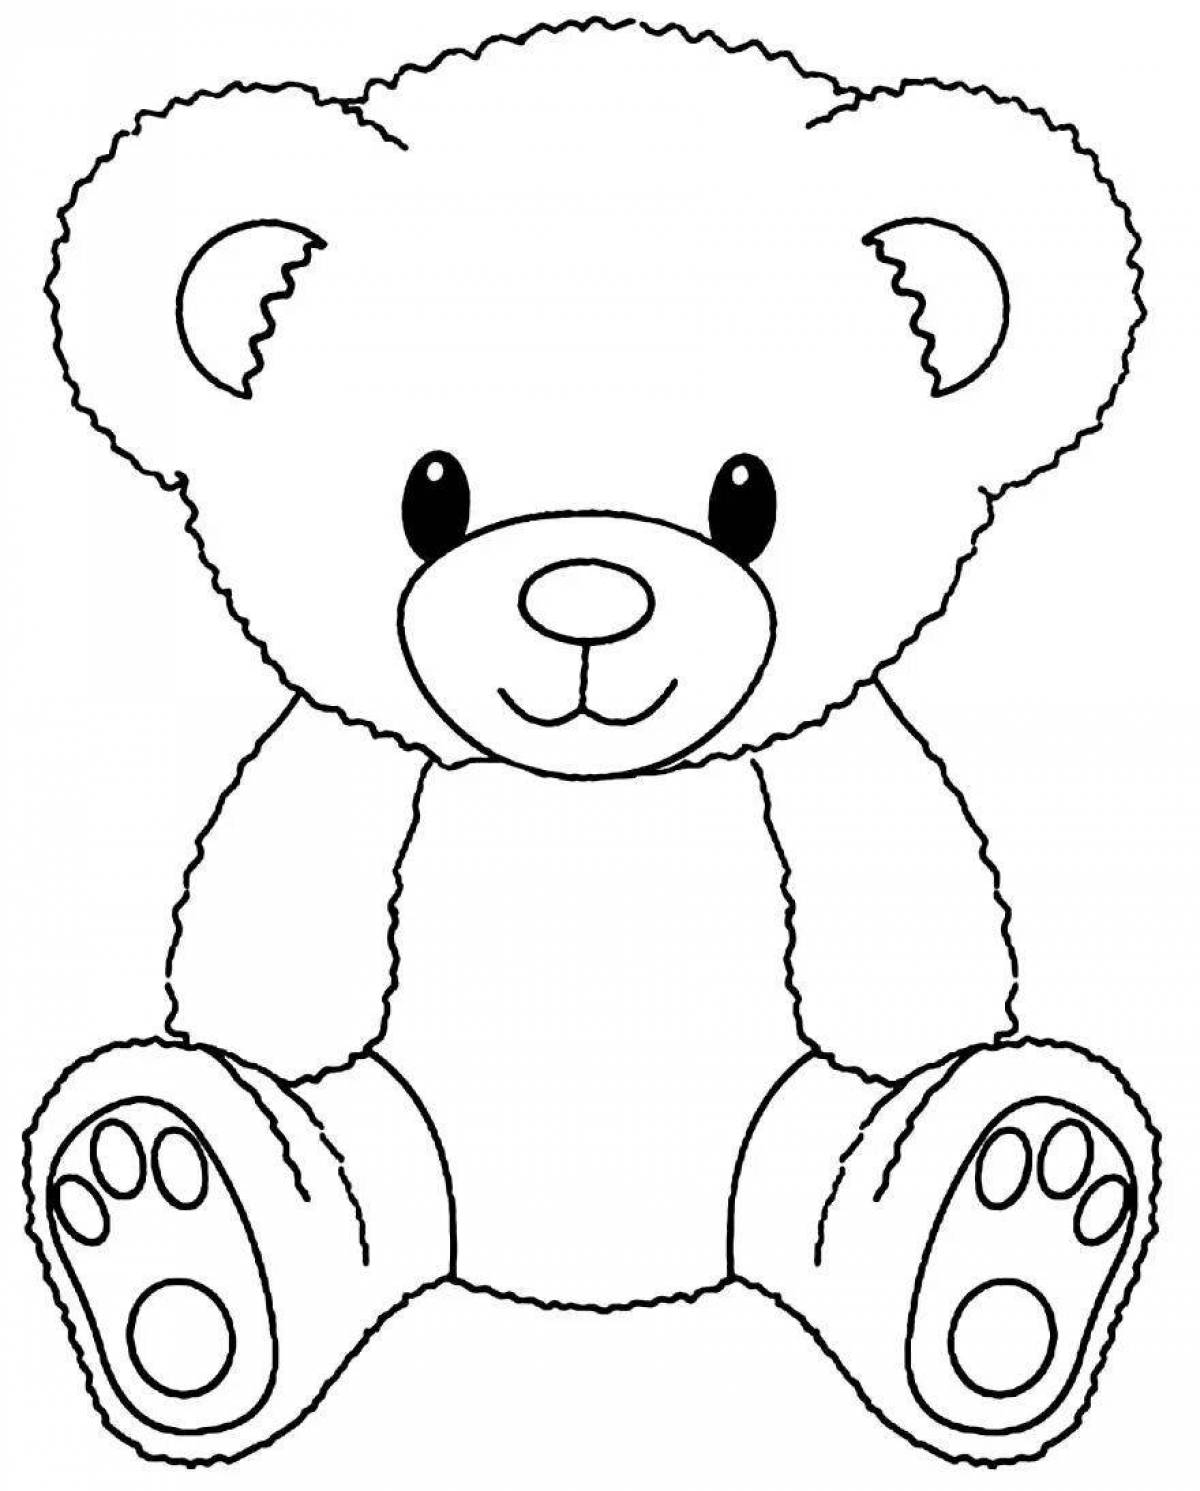 Coloring page of a sociable bear cub